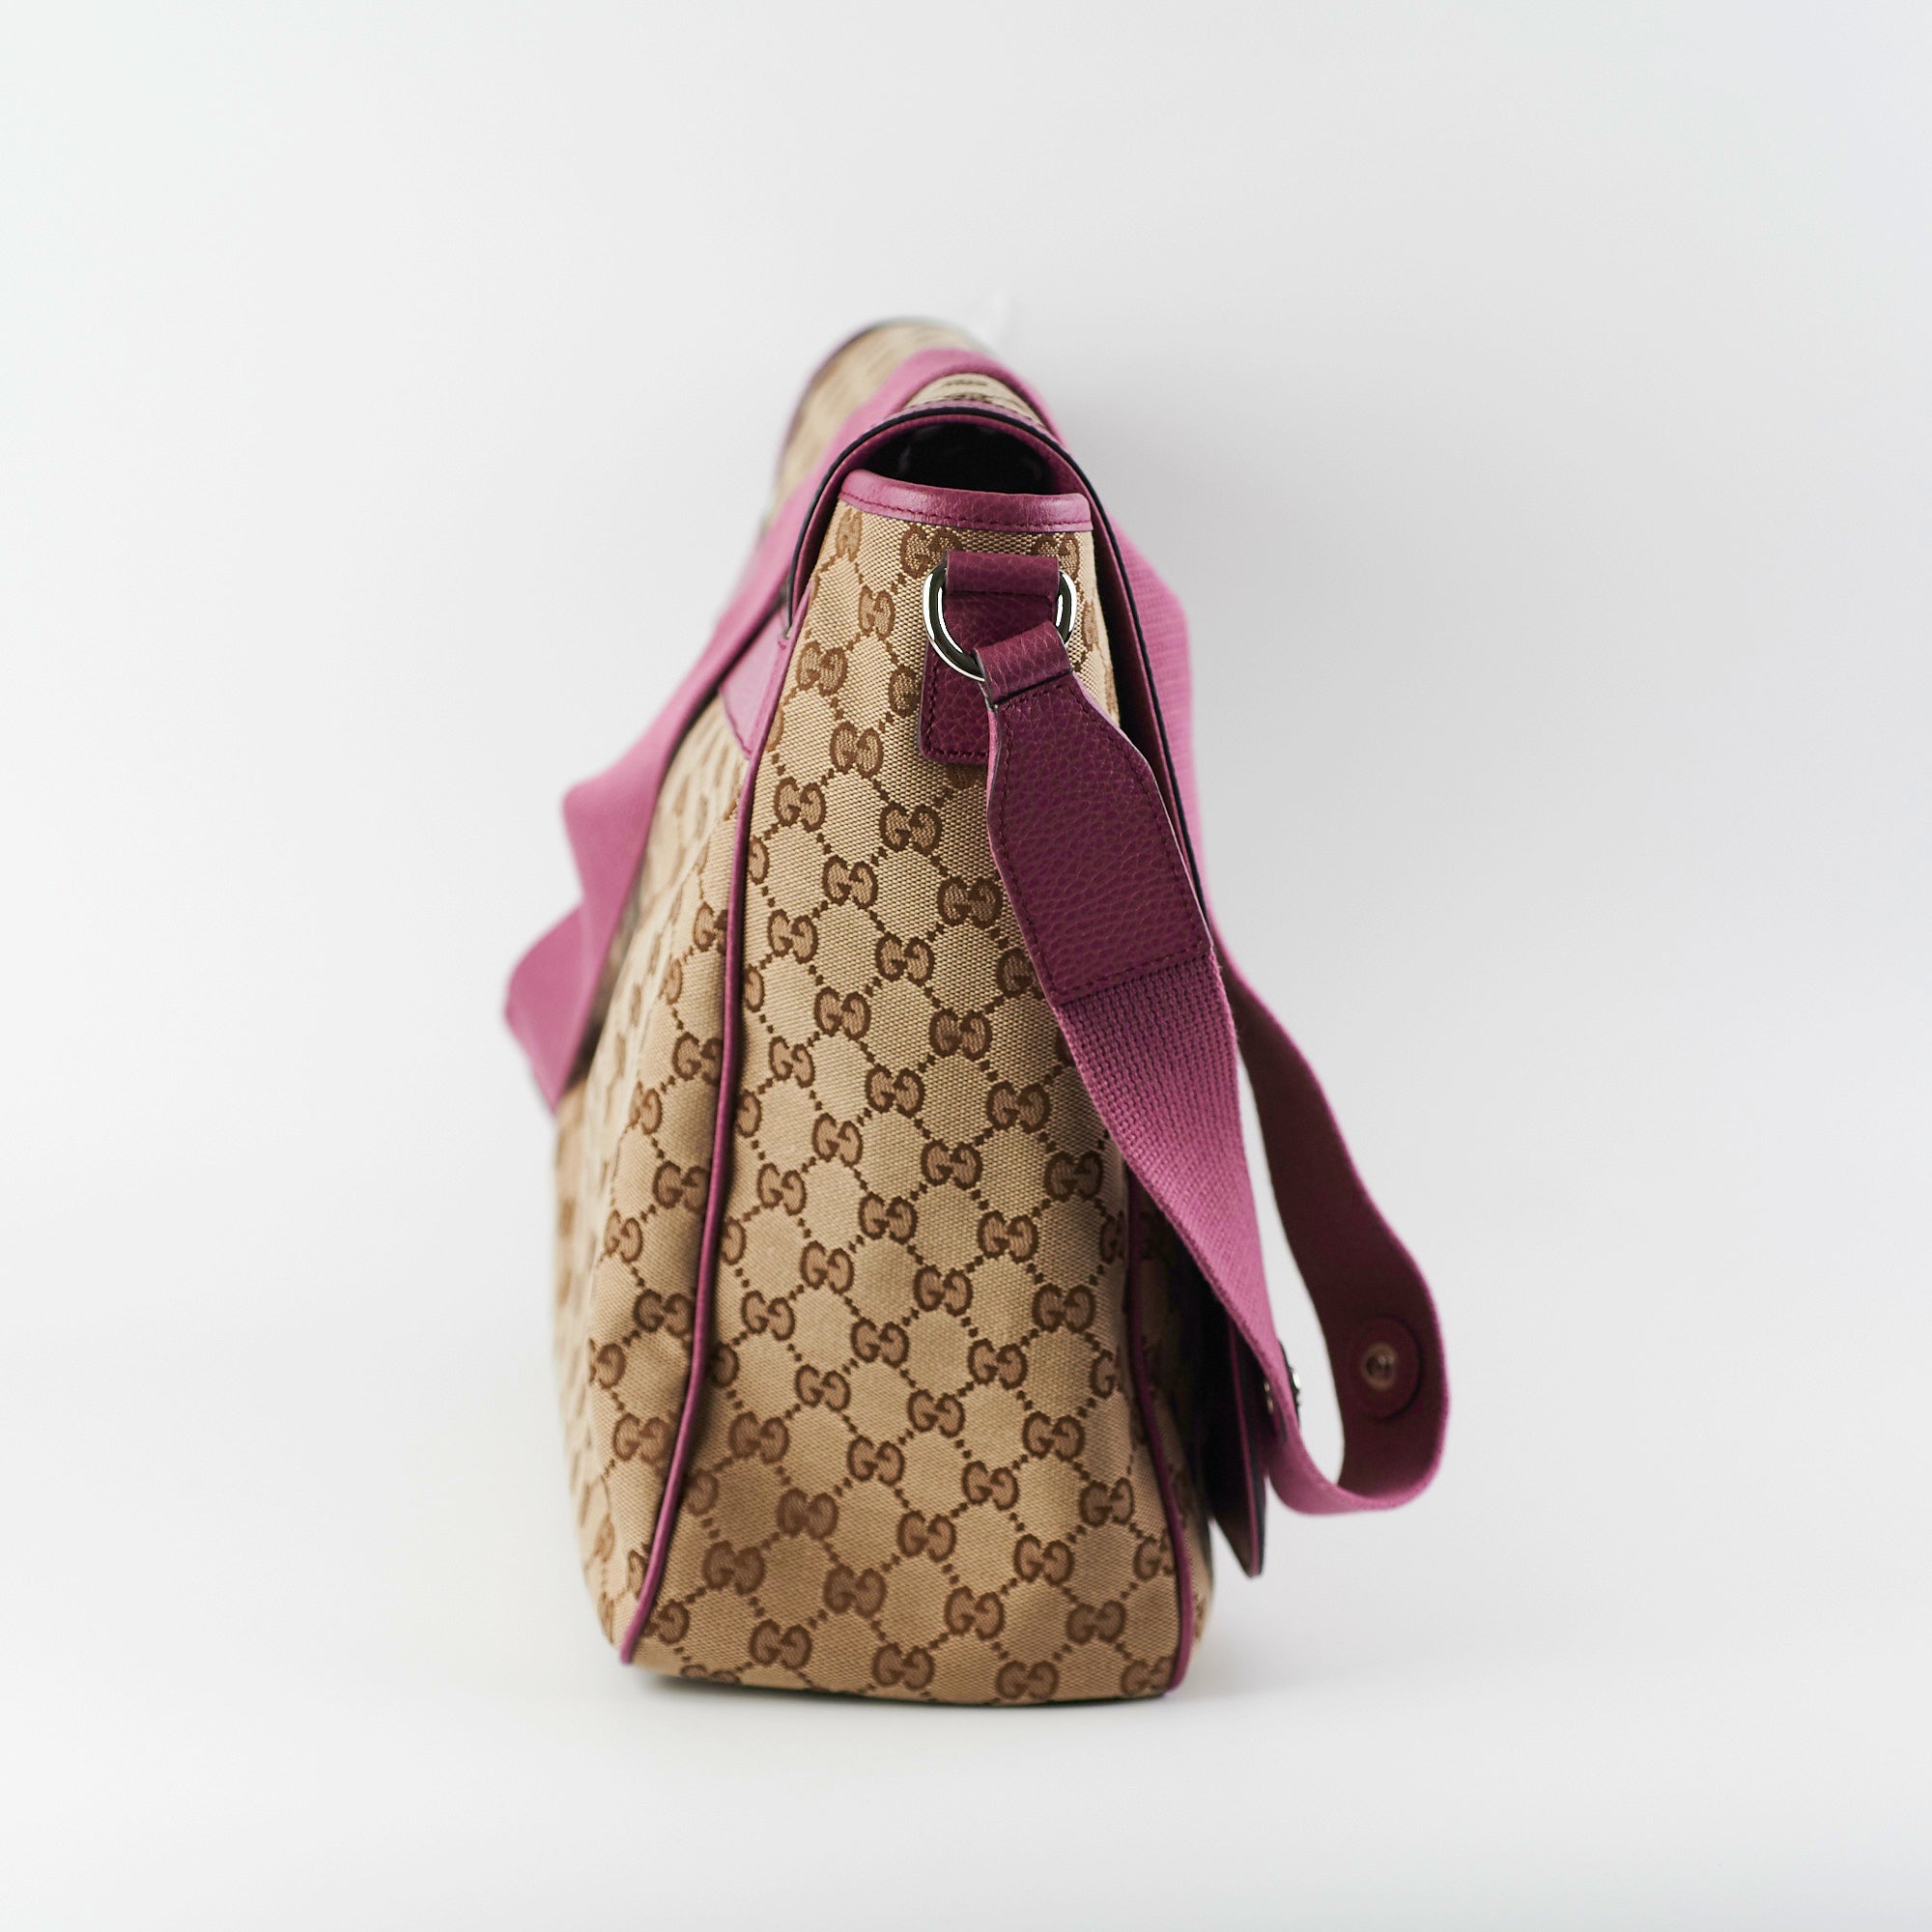 Gucci Baby Bag with Changemat Monogram Pink - THE PURSE AFFAIR